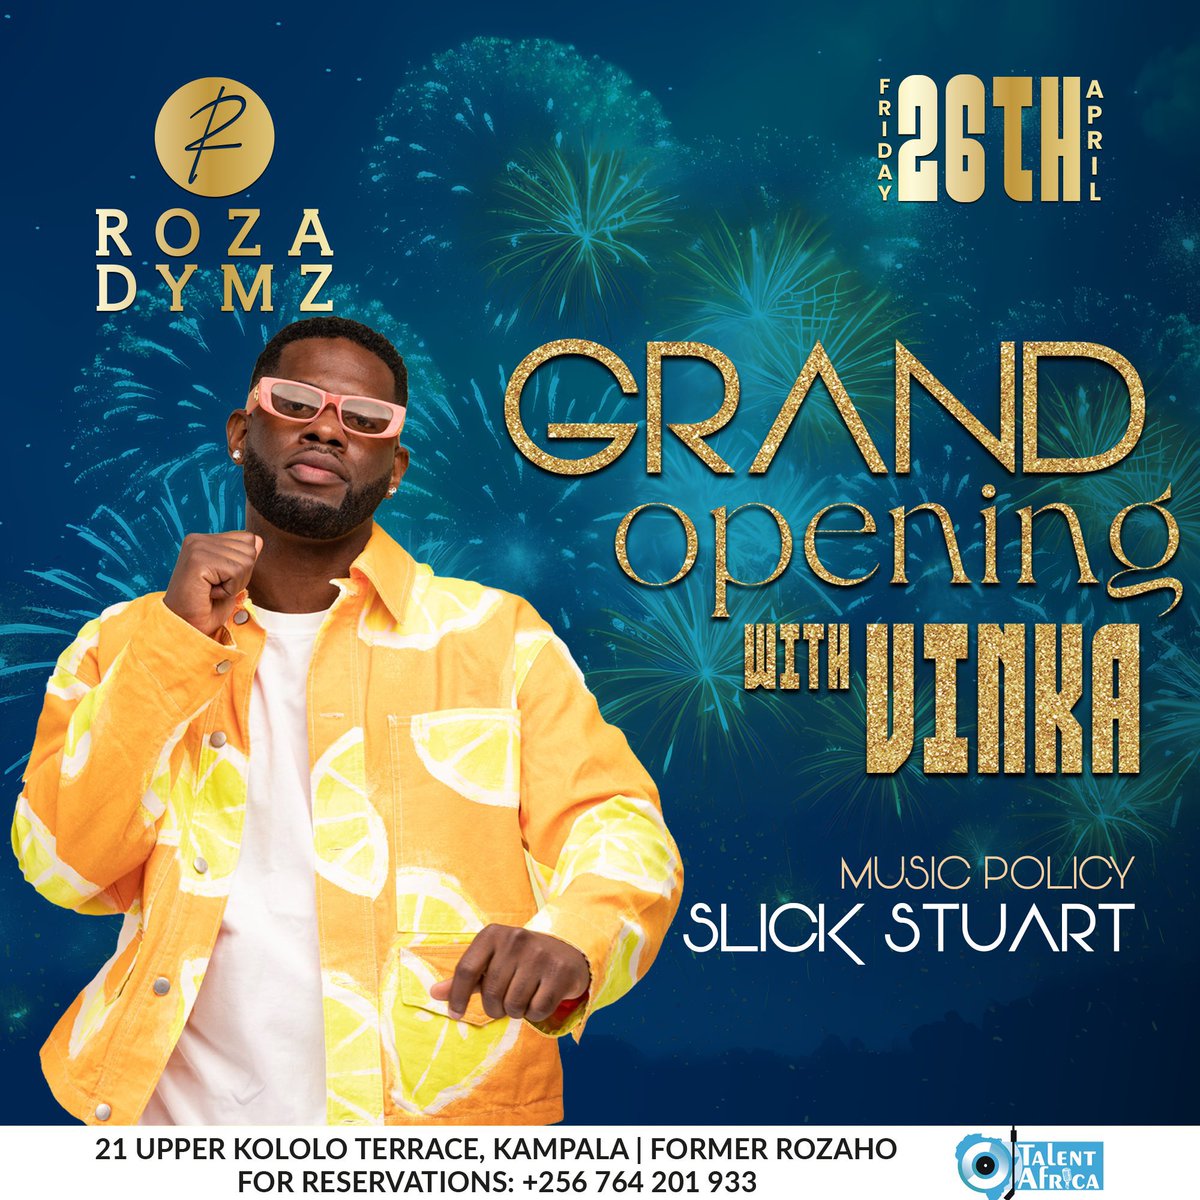 Welcome to the grand opening of @RozaDymz located at Upper Kololo, former Rozaho on Friday, 26th of April. Come experience ROZA DYMZ's ultimate dining and party experience, hosted by @talentafrica.